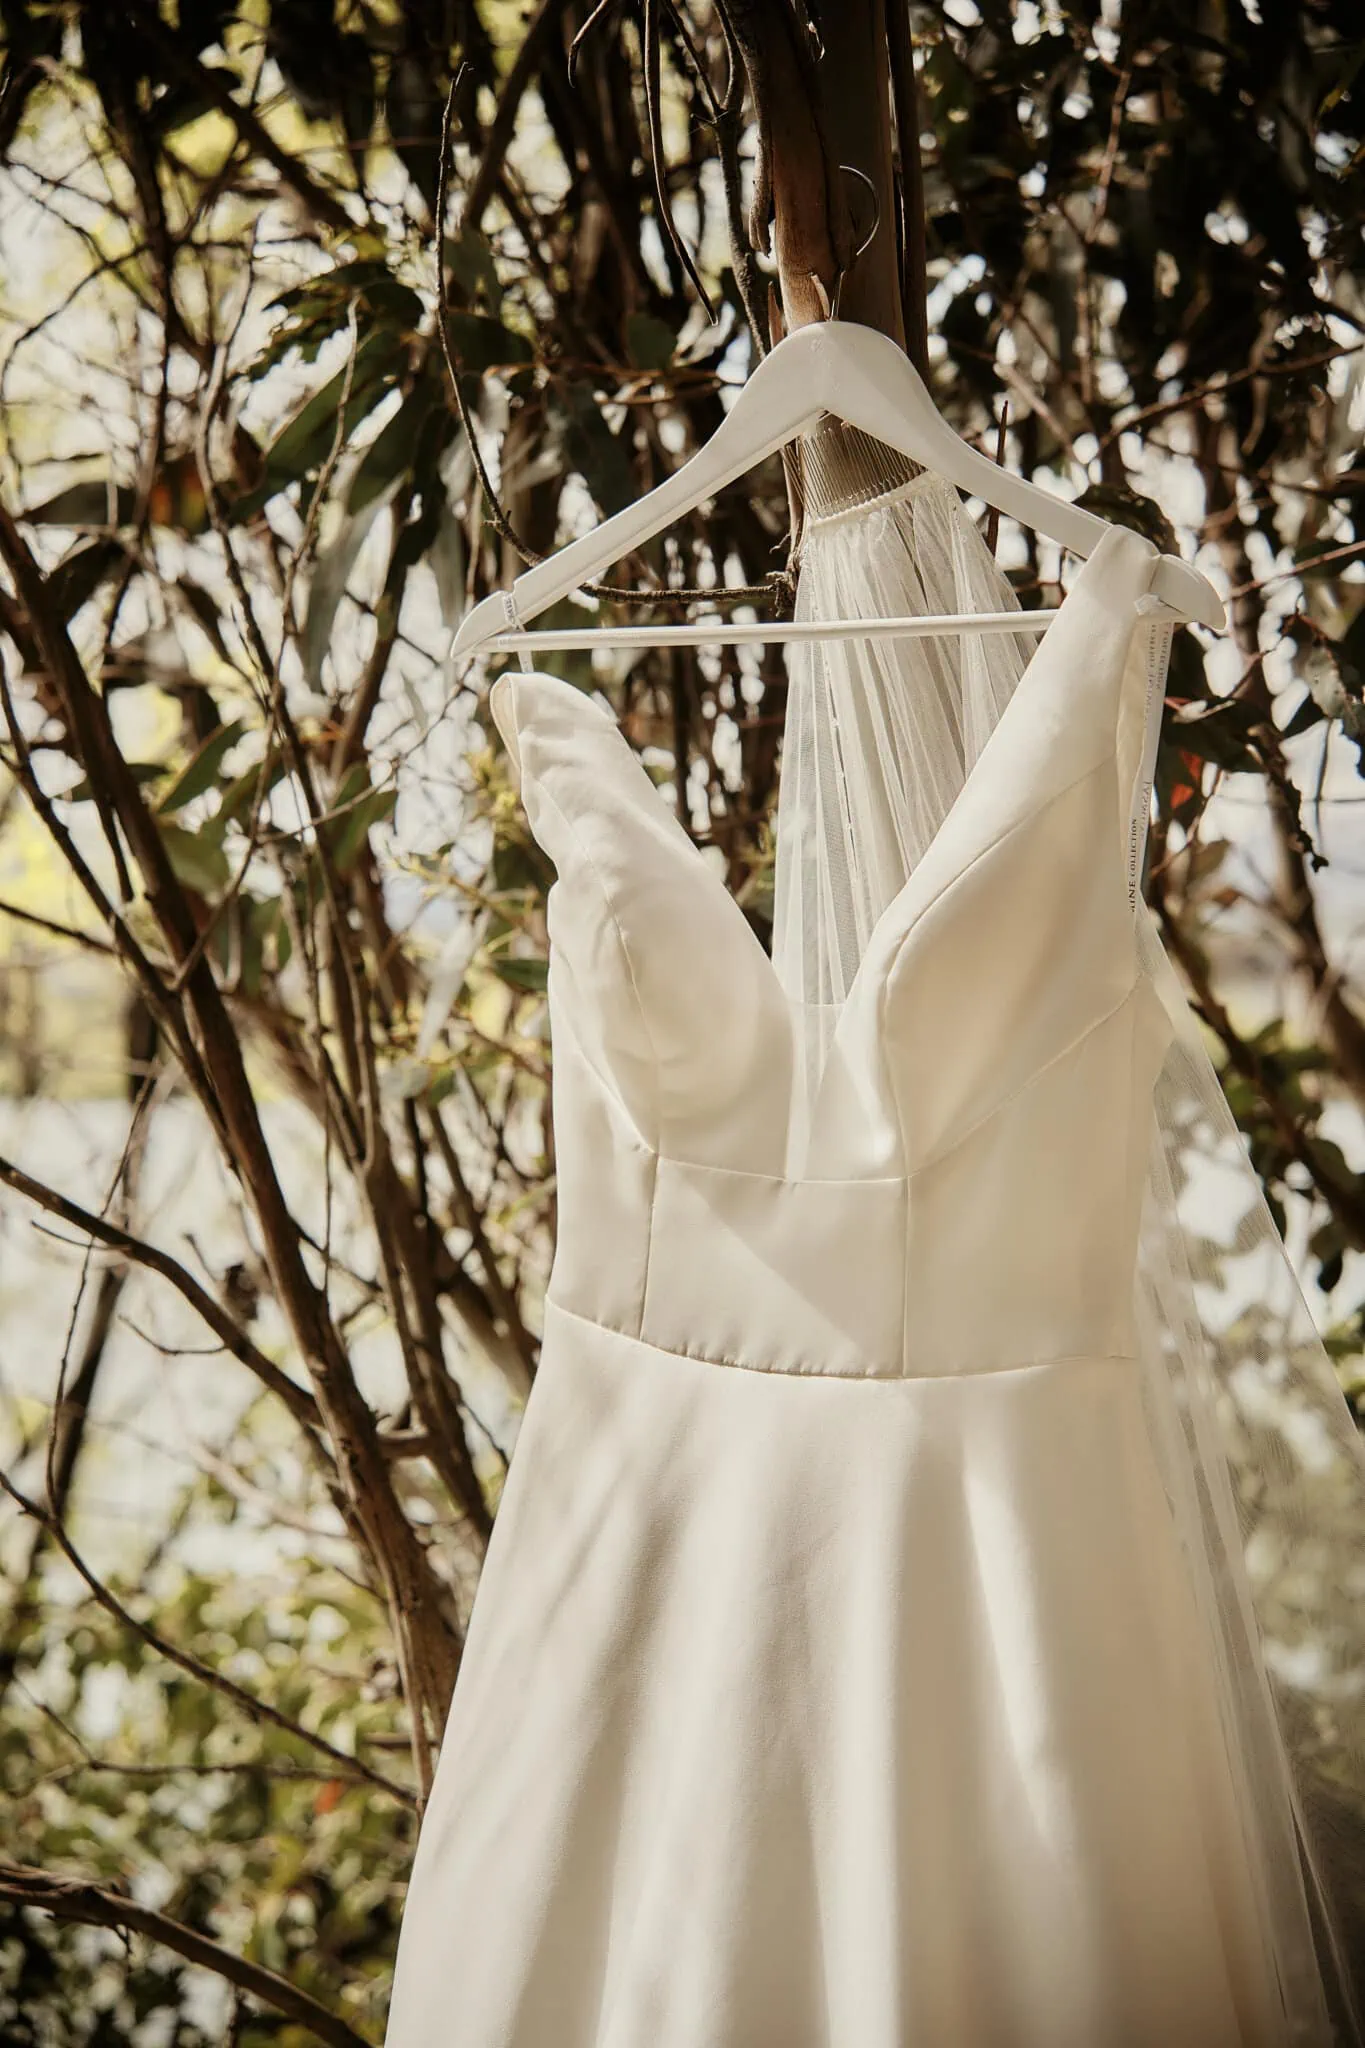 A white wedding dress hanging from a tree at Michelle and Vedran's elopement wedding in Rees Valley Station.